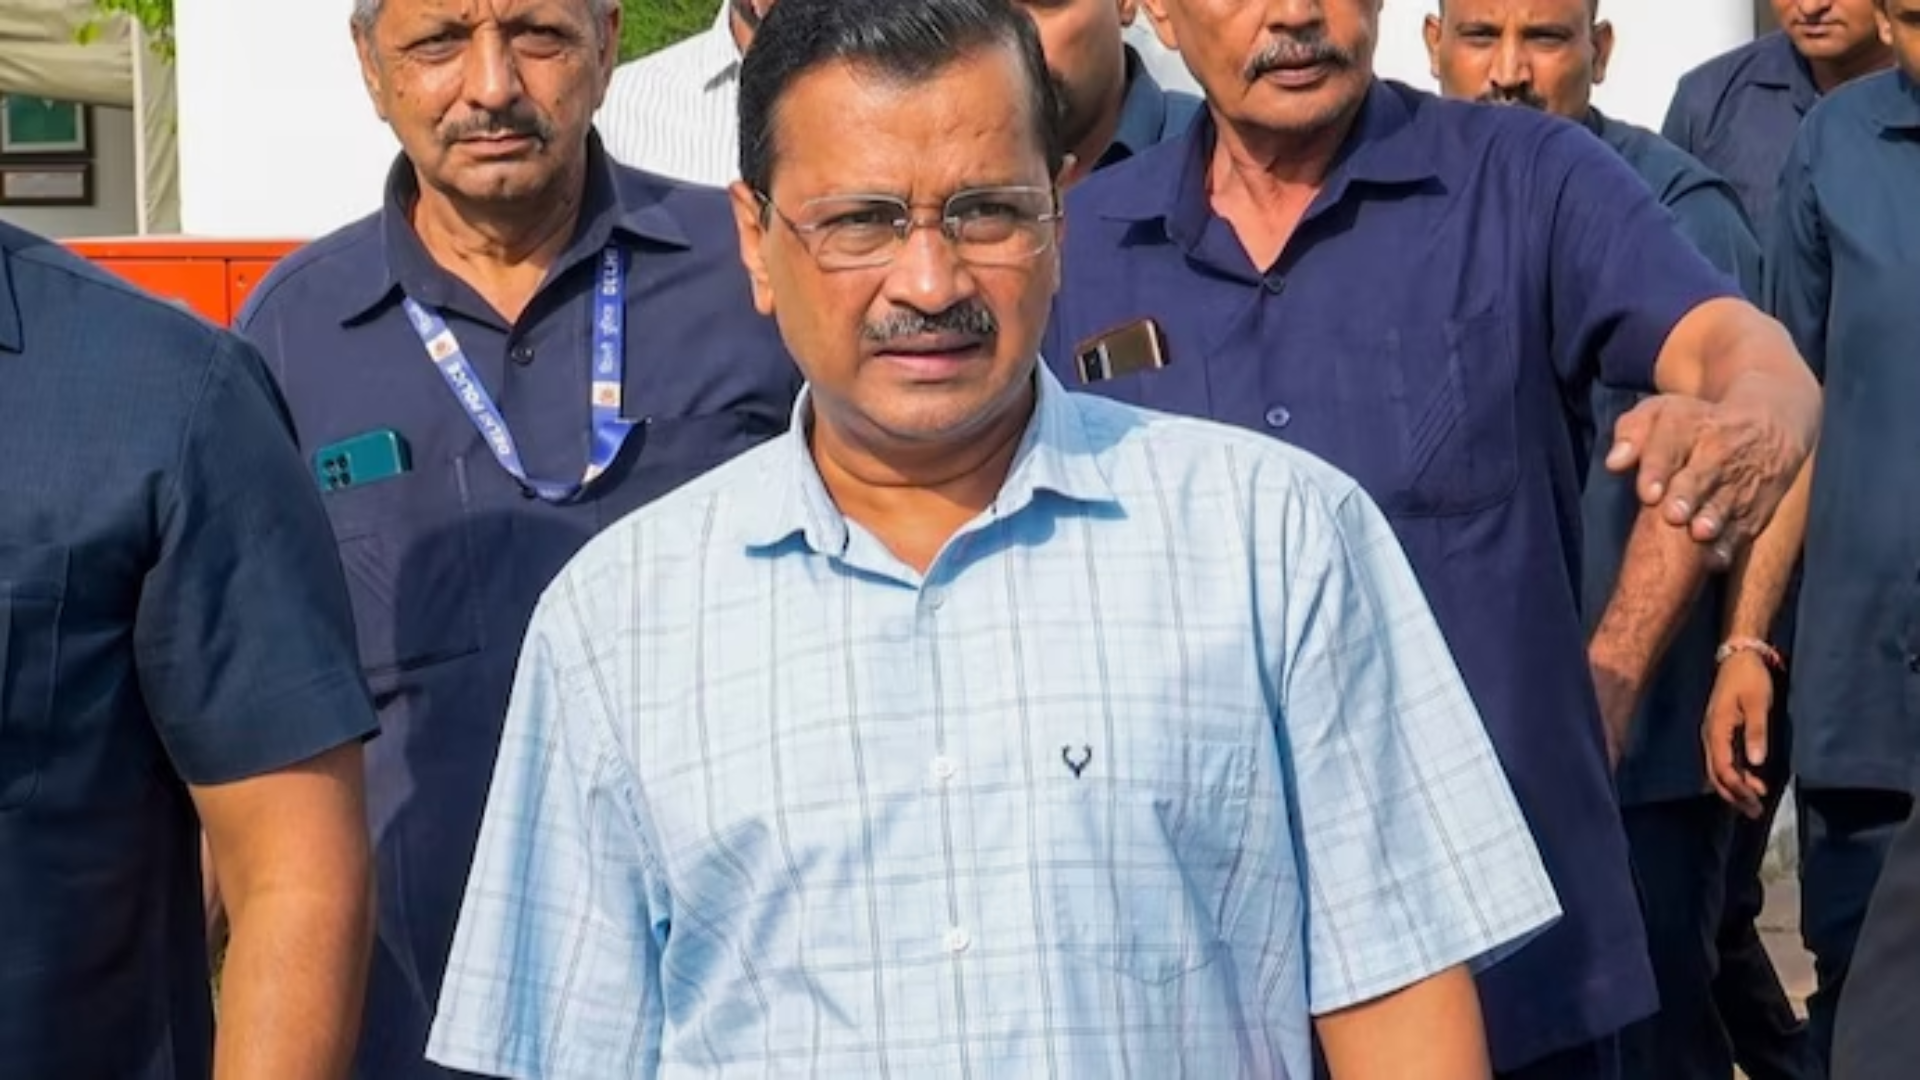 Delhi Chief Minister Arvind Kejriwal Arrested by Enforcement Directorate in Liquor Policy Case